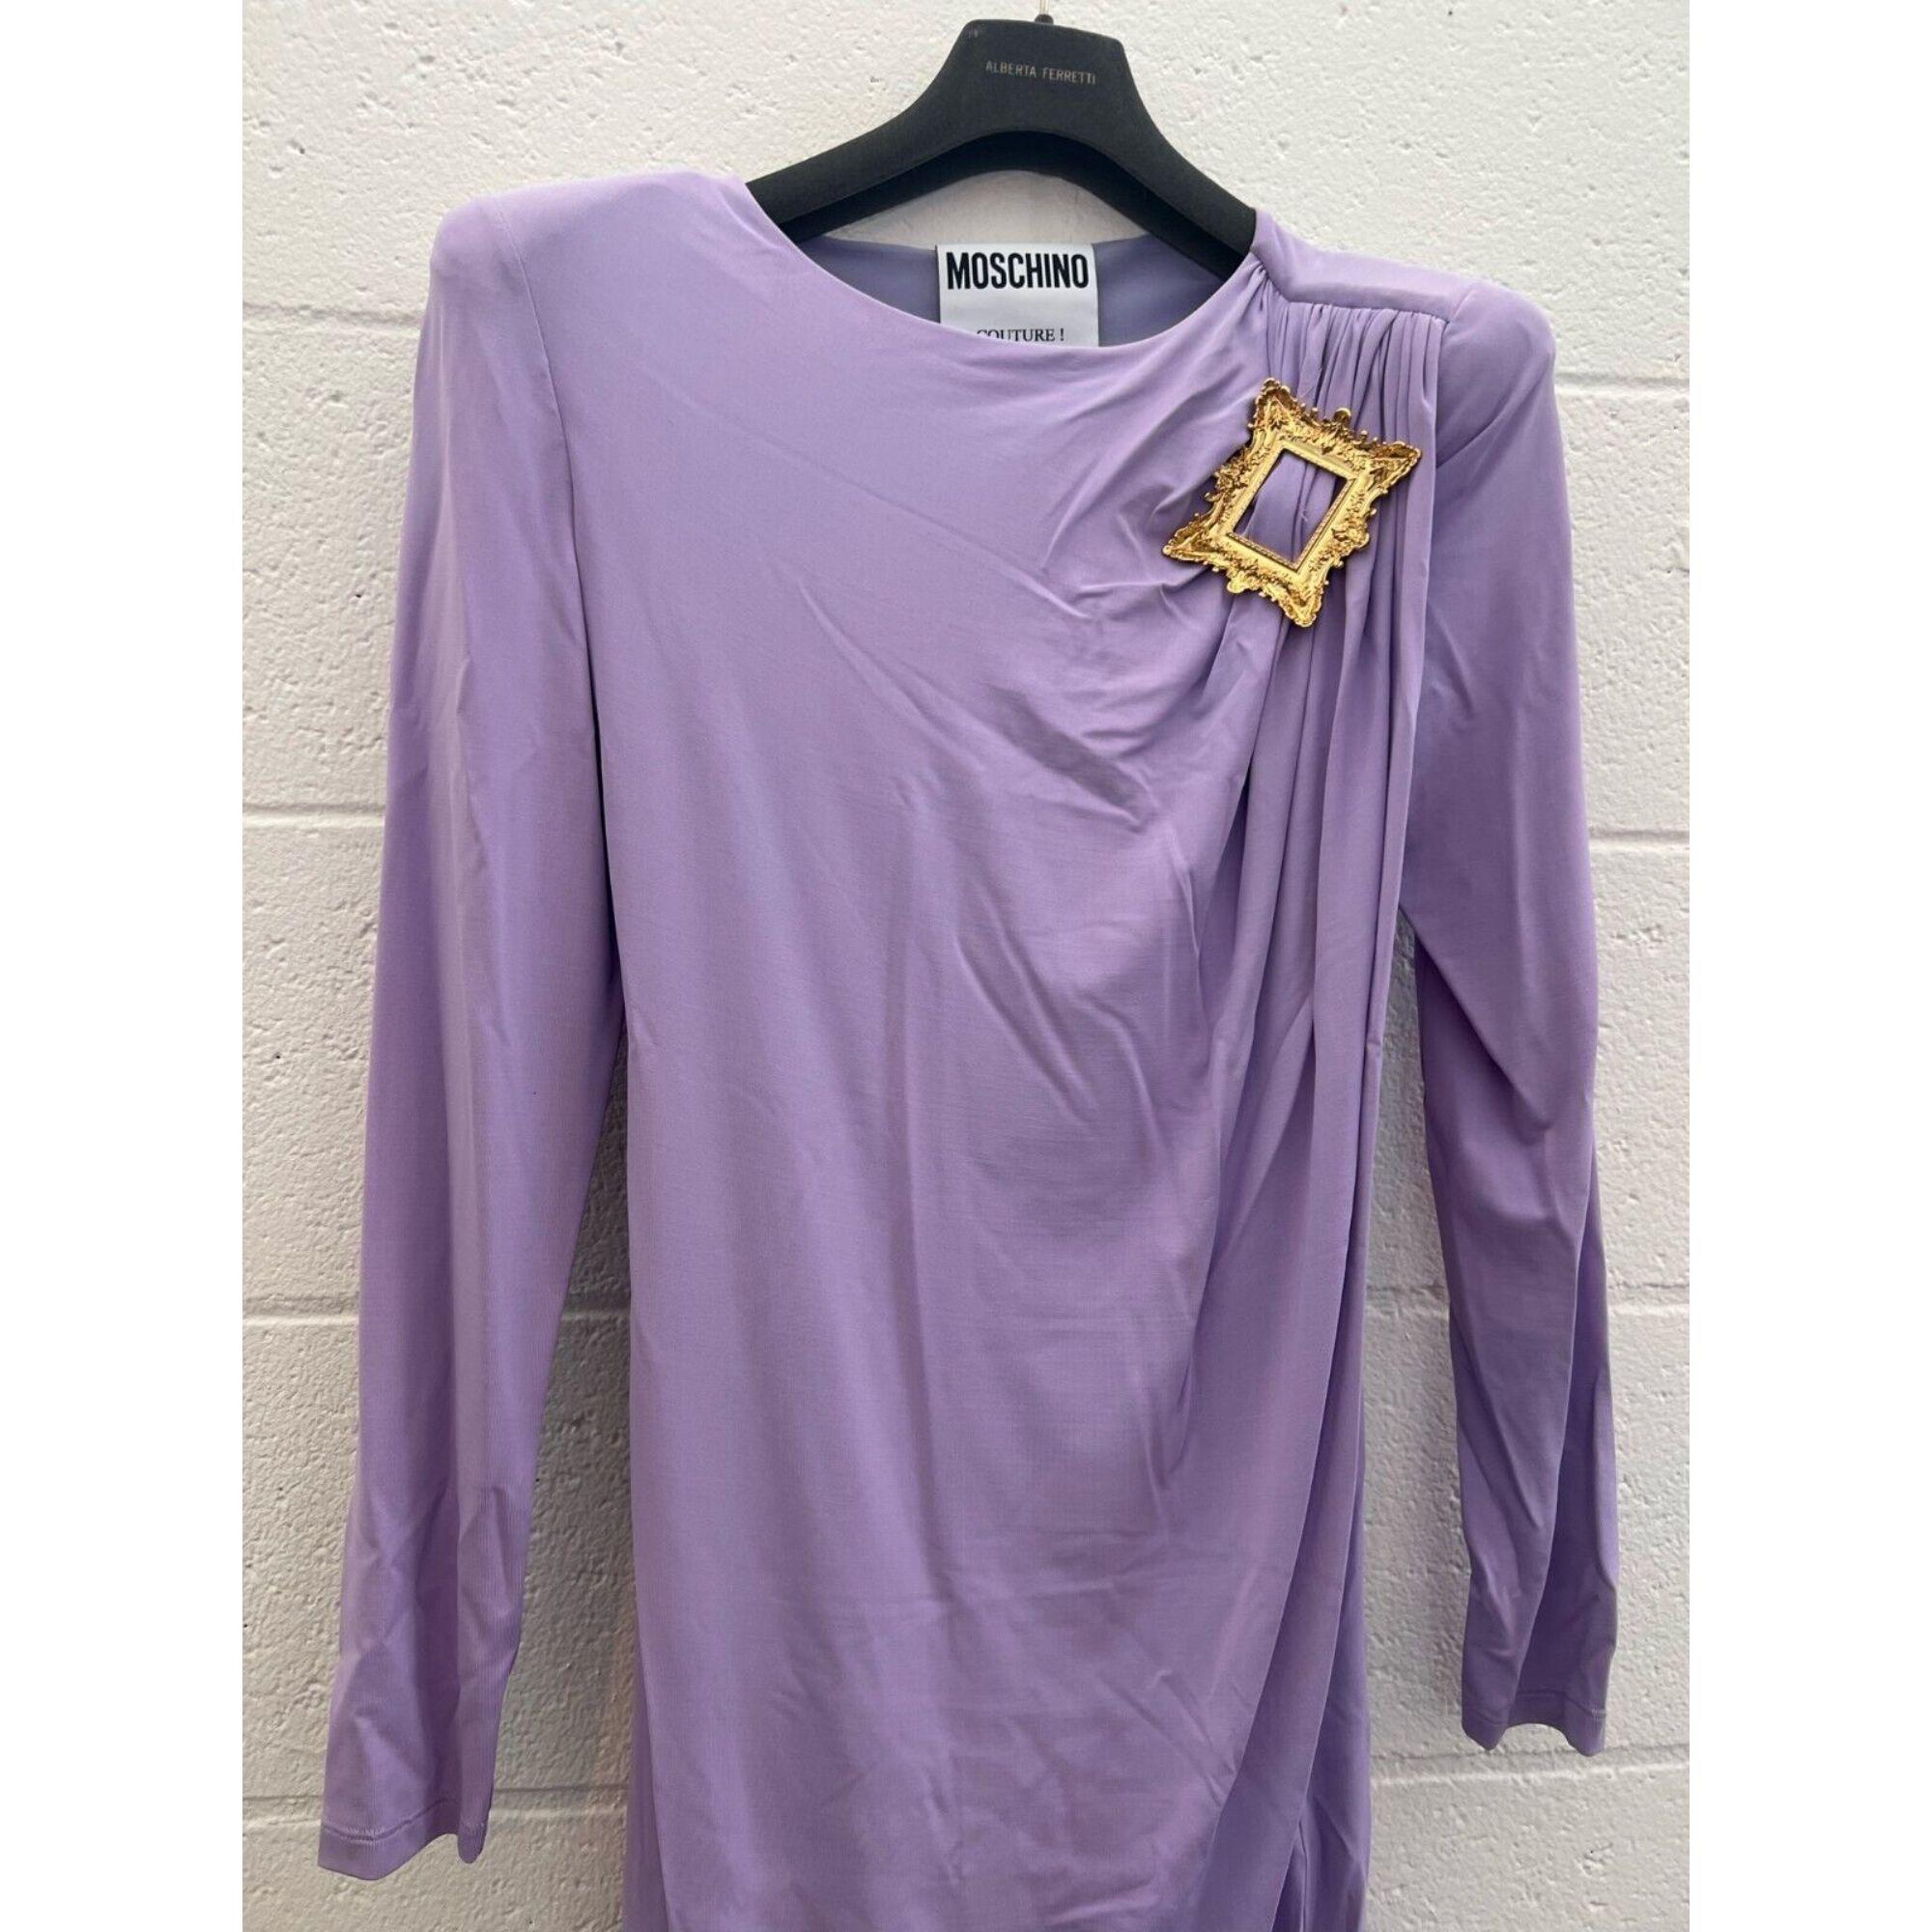 SS20 Moschino Couture Jeremy Scott Violet Picasso Painting Frame Viscose Dress

Additional Information:
Material: 91% Viscose, 9% EA, 100% PA Lining
Color: Violet
Size: IT 38 / US 4
Pattern: Solid
Style: Bodycon, Knee Length
Dimensions:  Bust 16.5